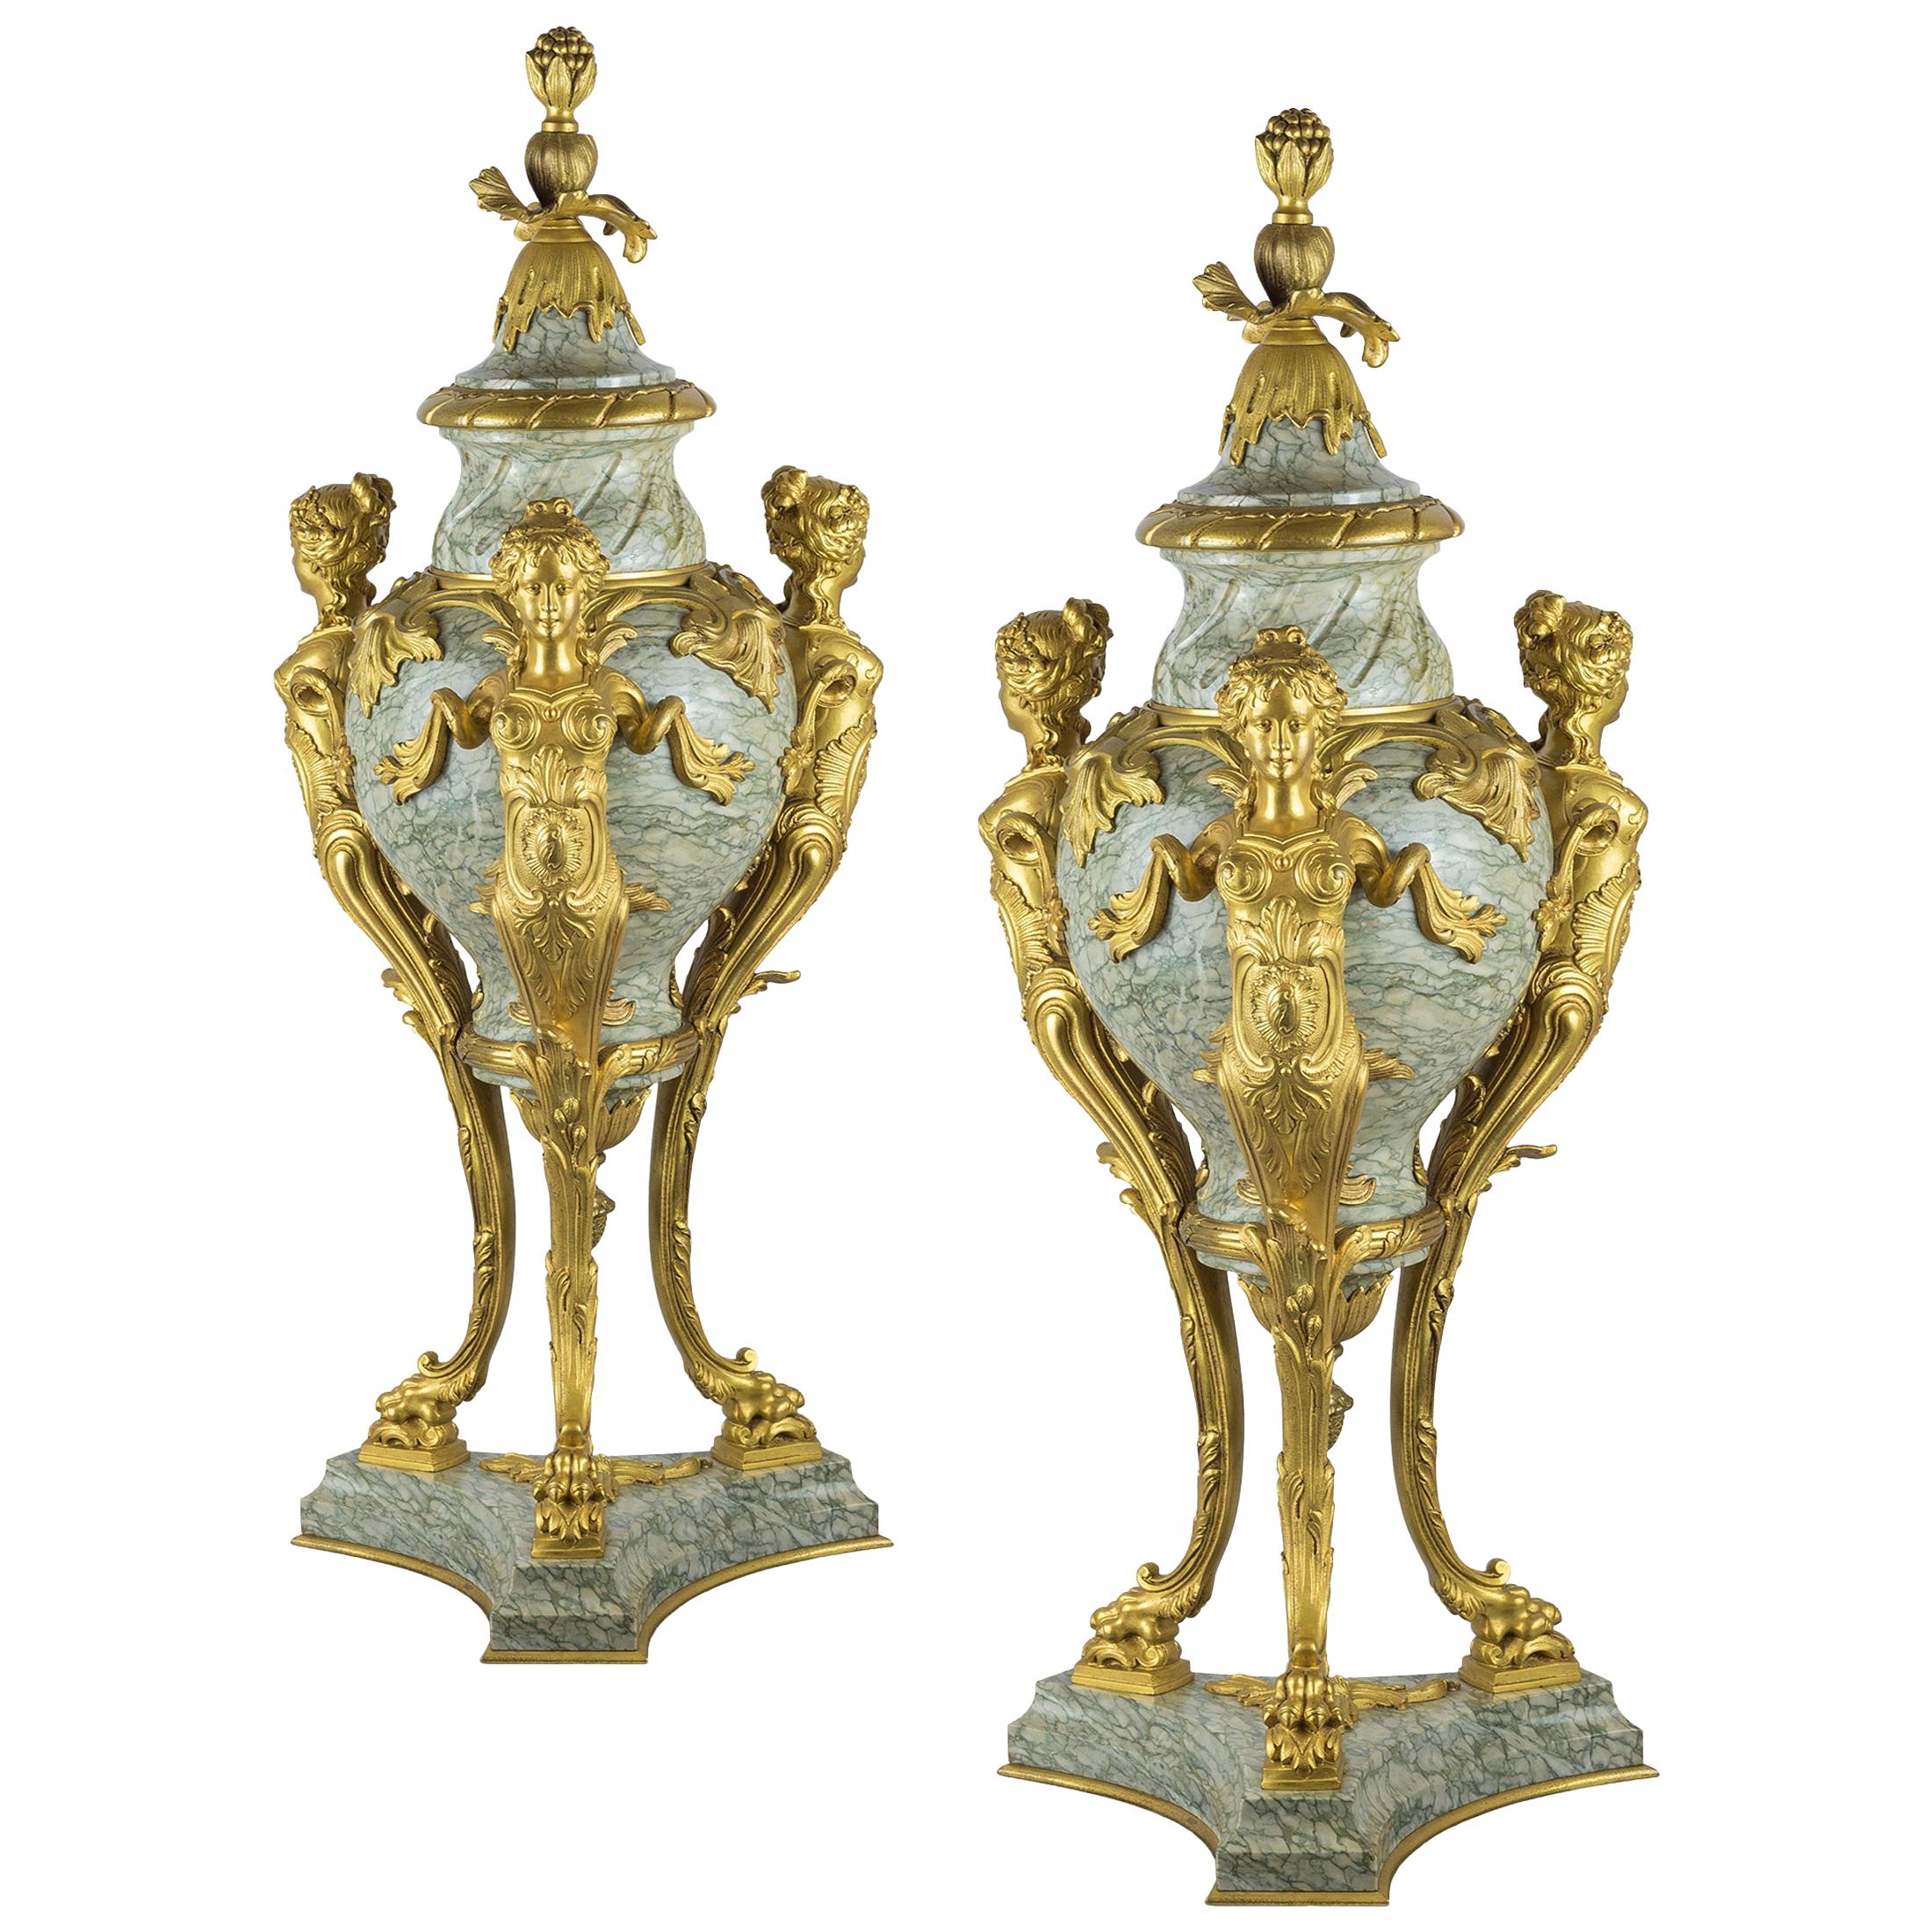 Monumental 19th Century Pair of French Rouge Marble and Gilt Bronze Urns